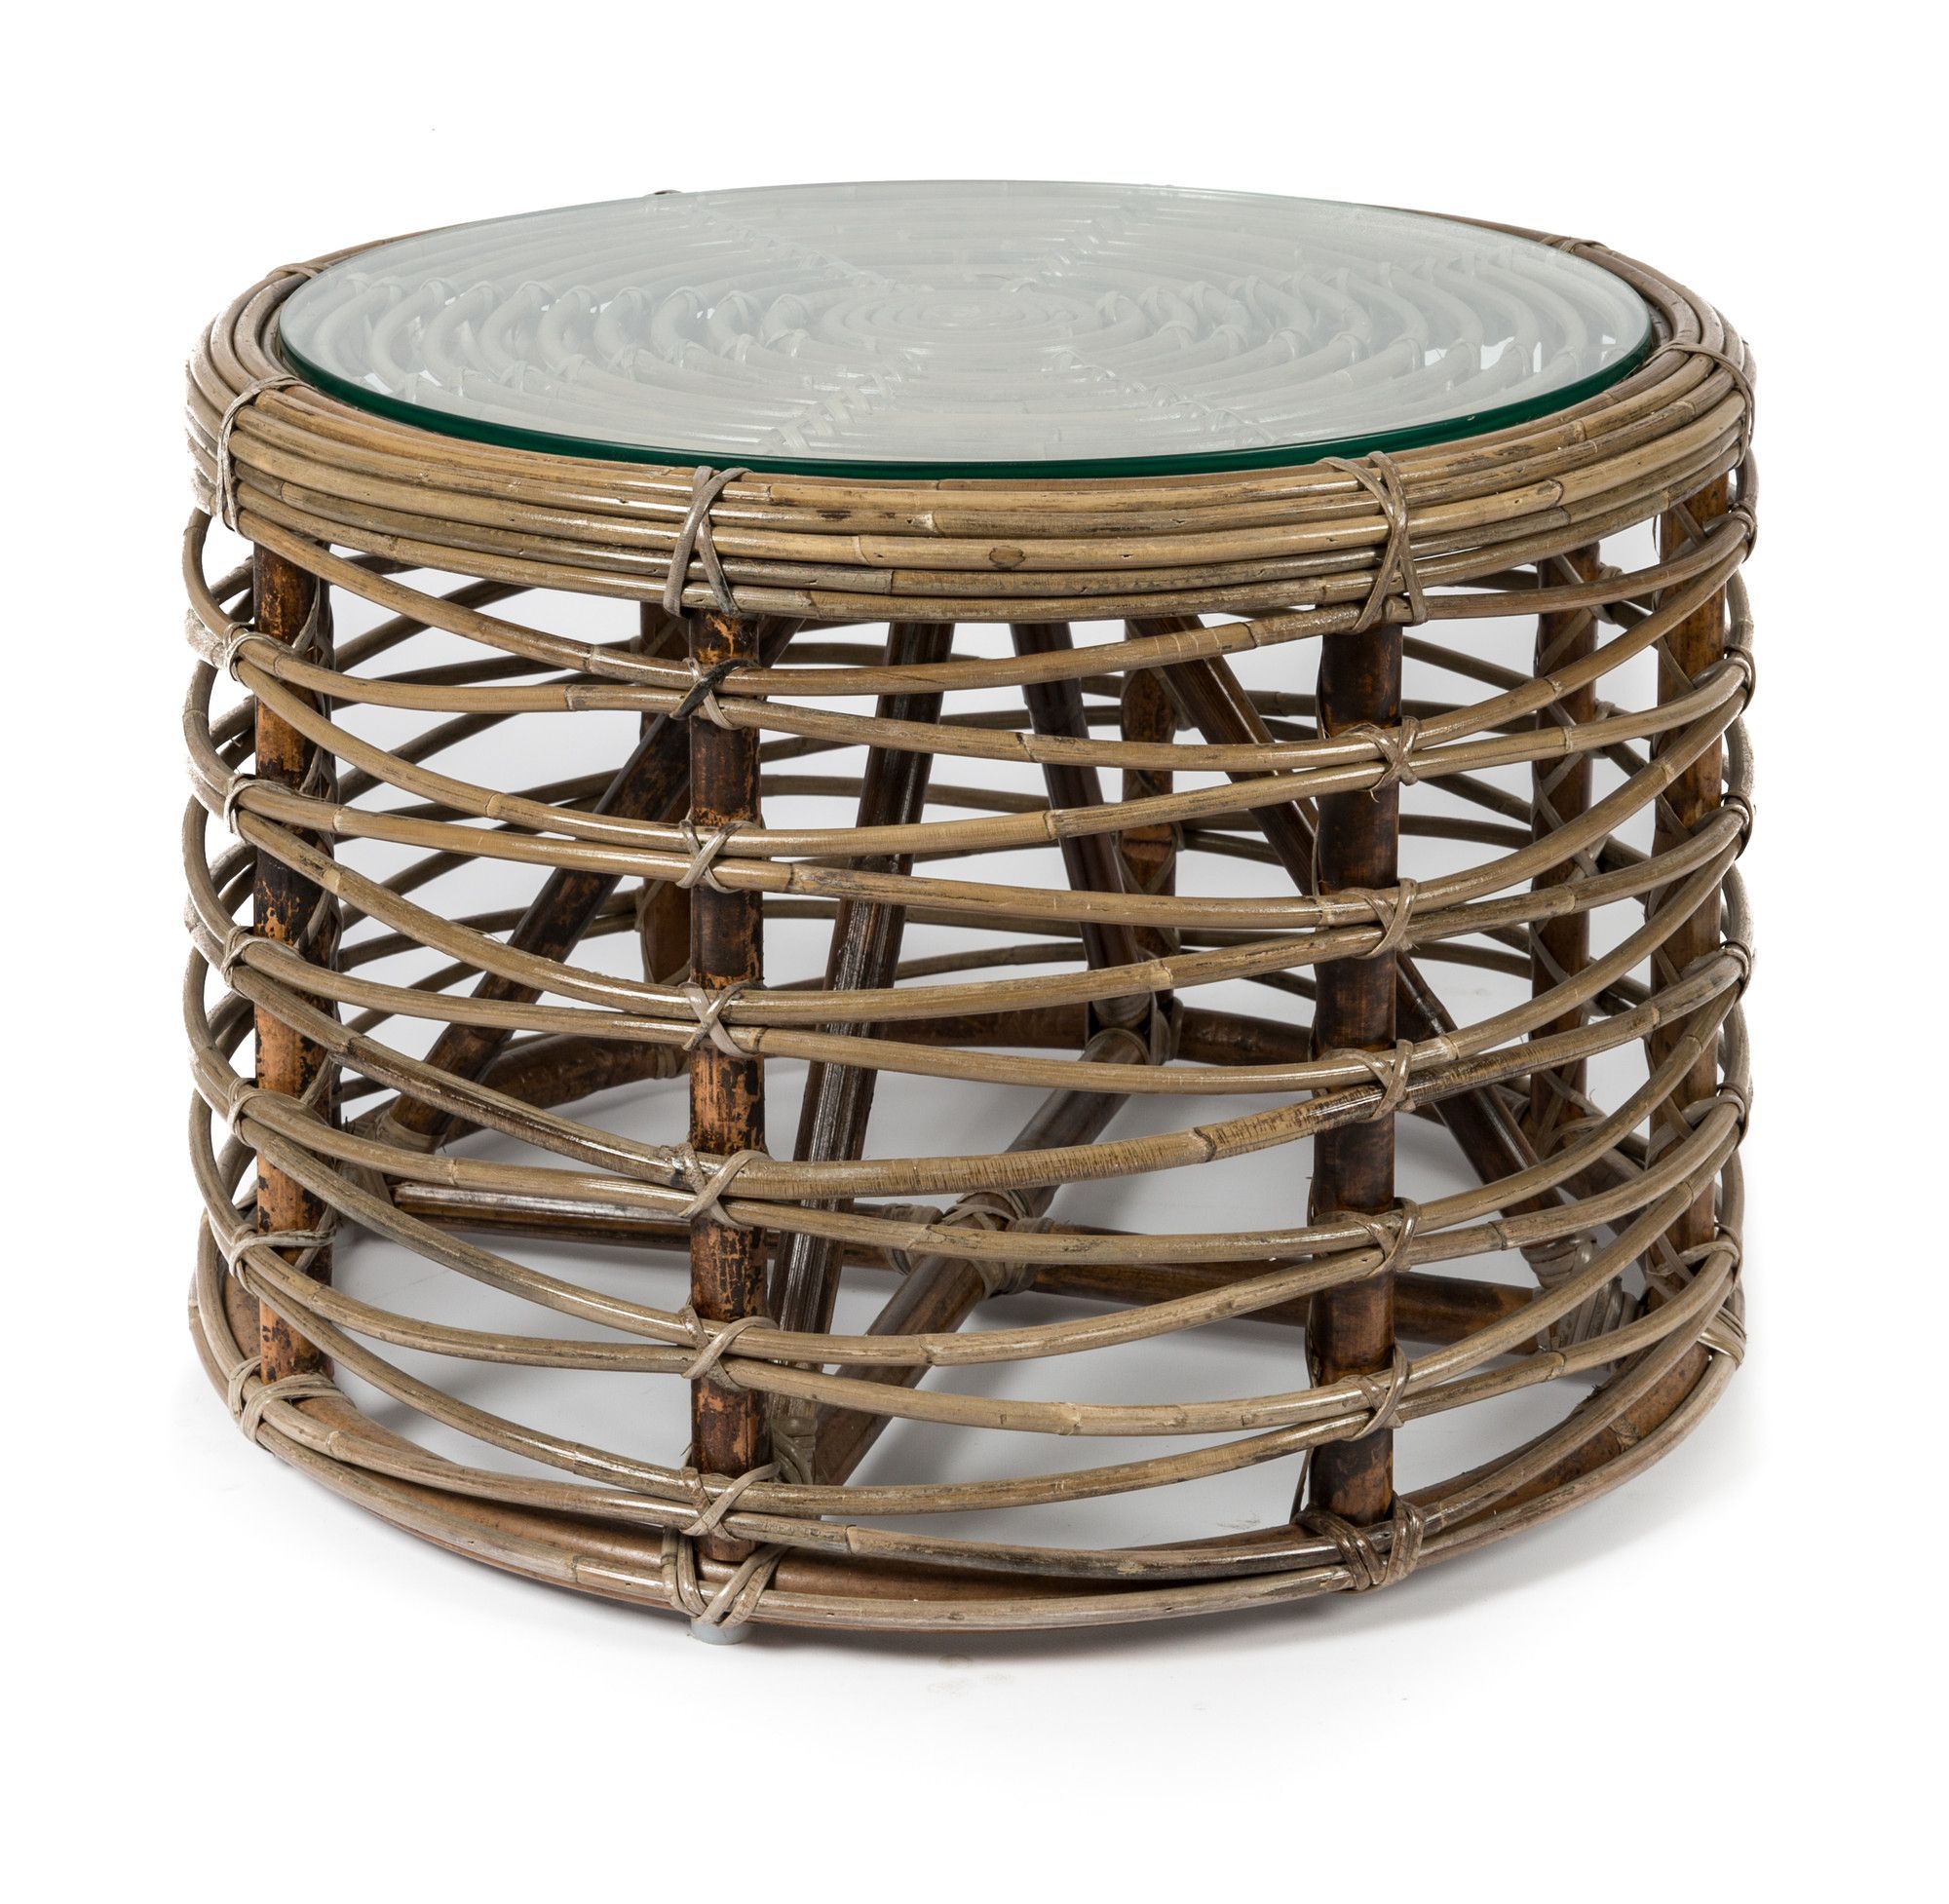 New Santiago Woven Rattan Round Coffee Table – Lifestyle Intended For Most Recent Wicker Coffee Tables (Gallery 11 of 20)